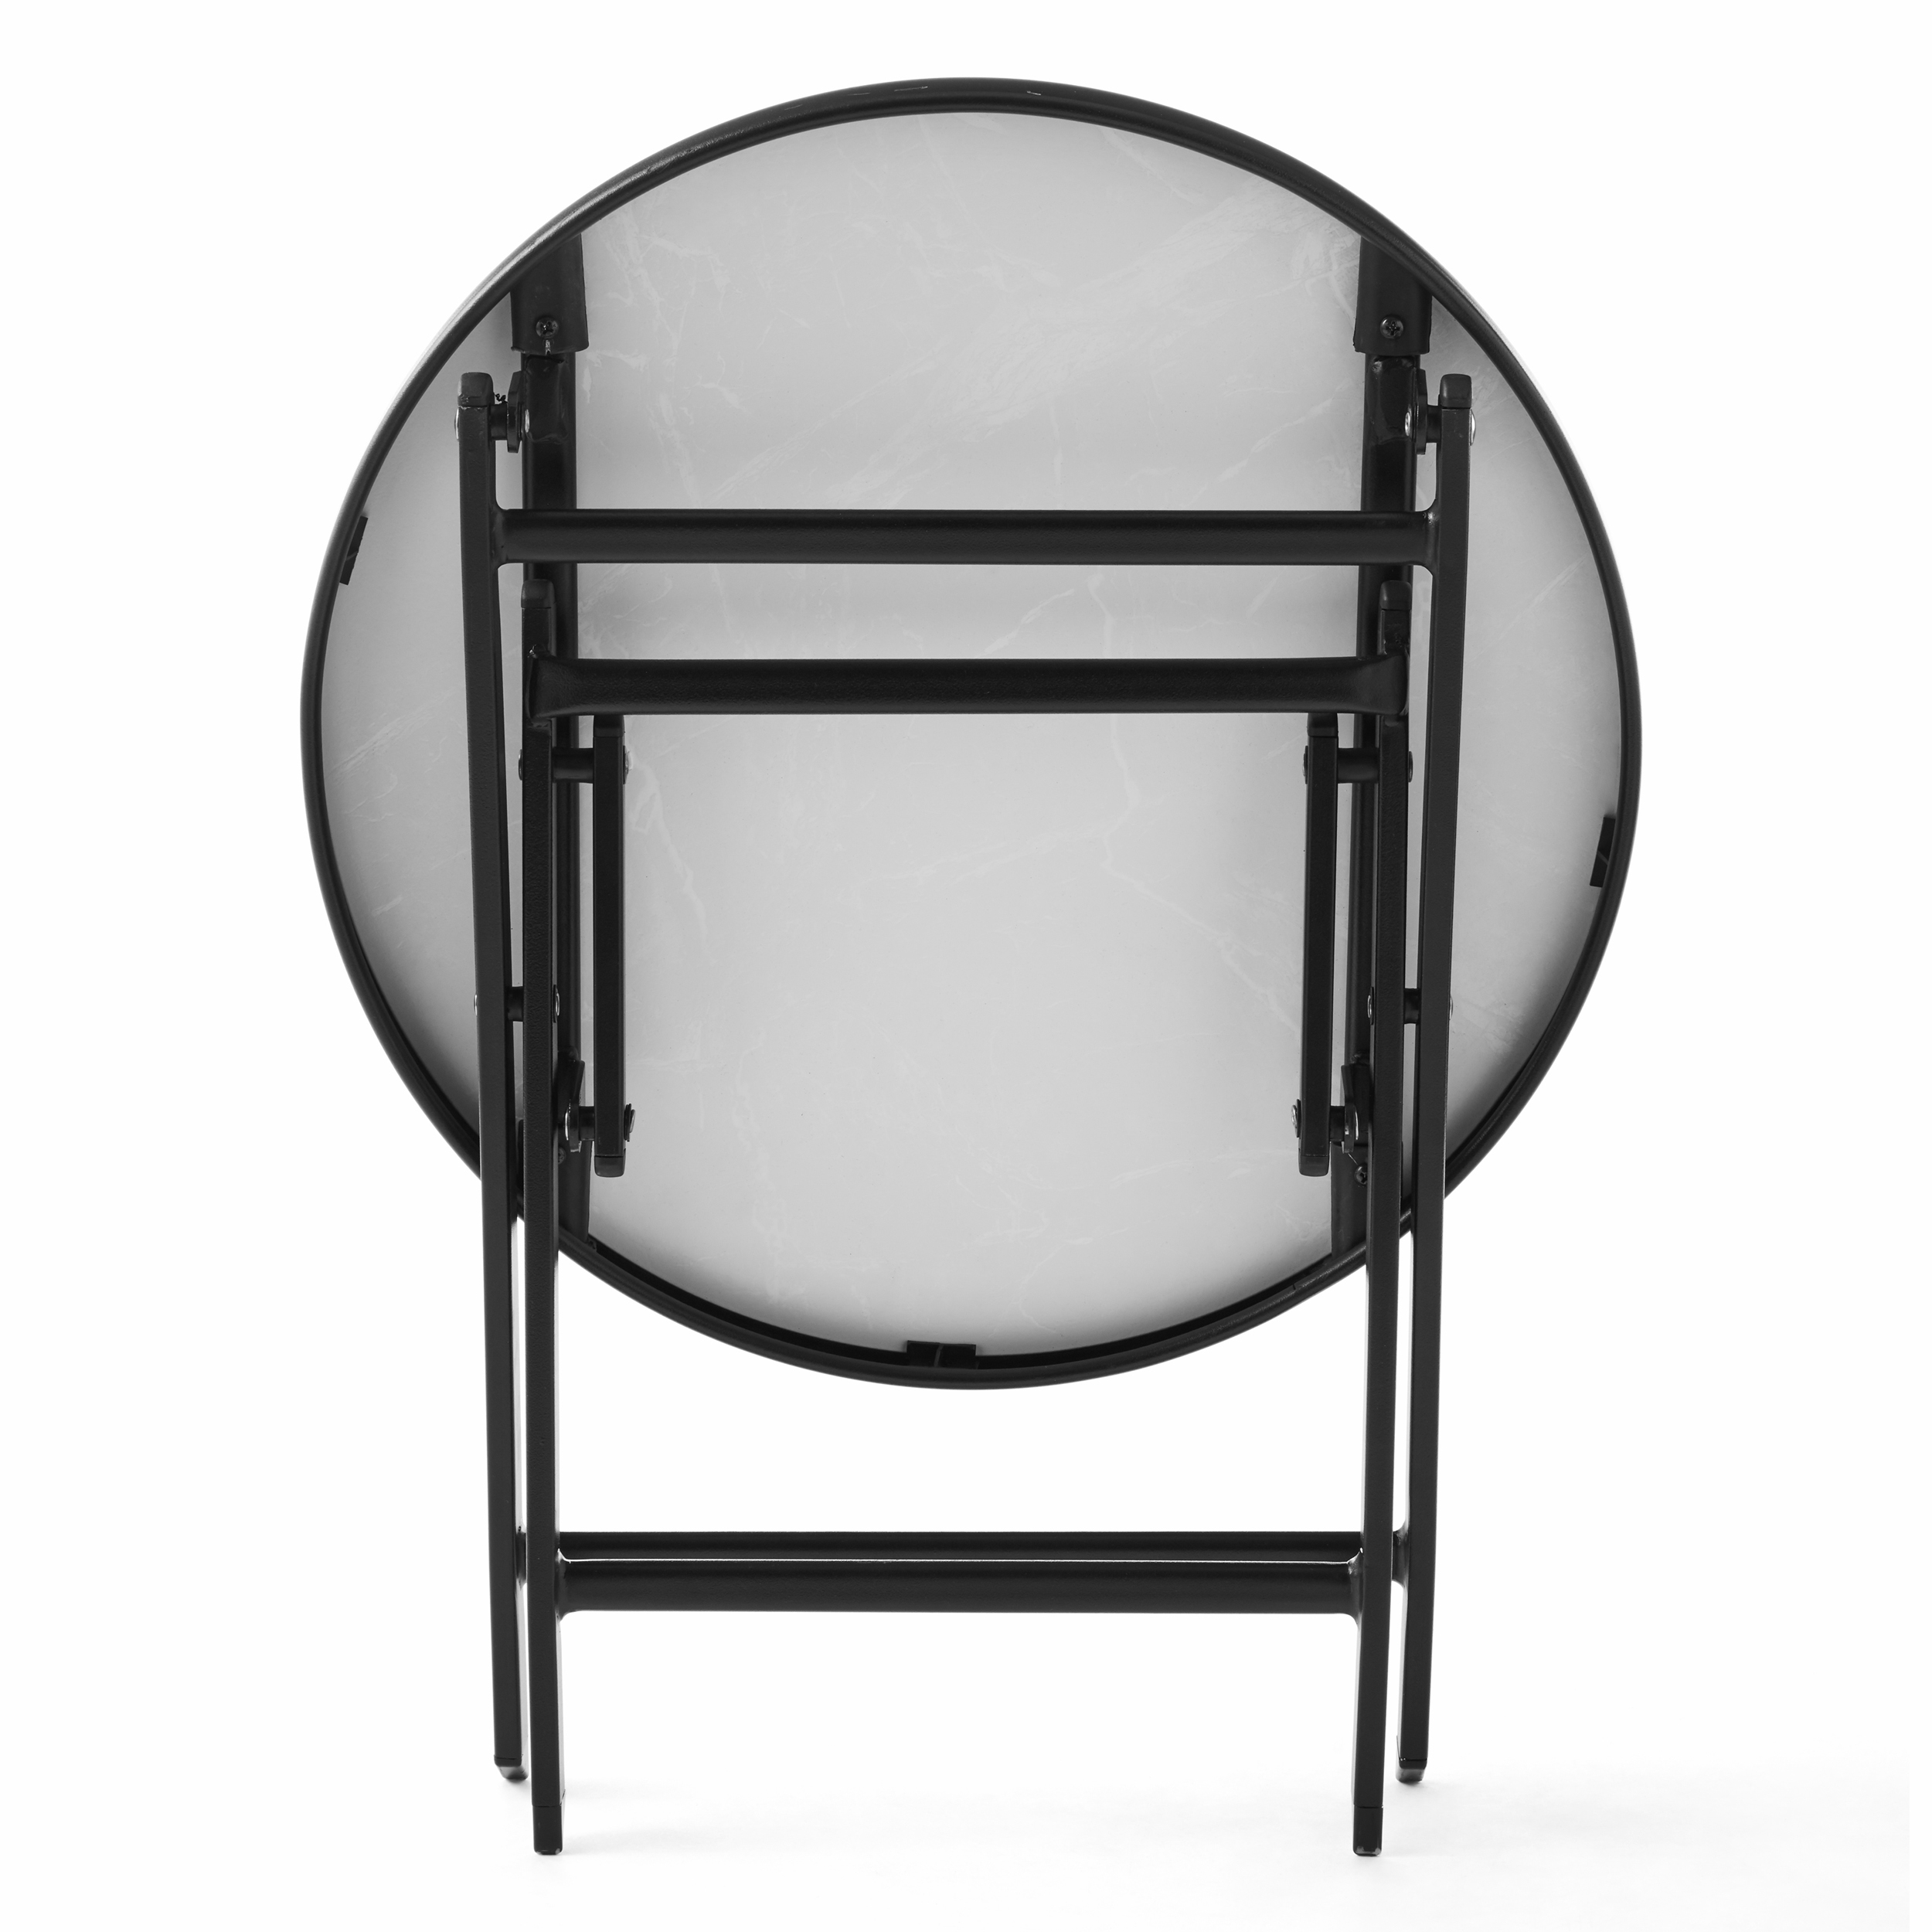 Mainstays 18" Greyson Square White Marble Steel Round Folding Table - image 4 of 7